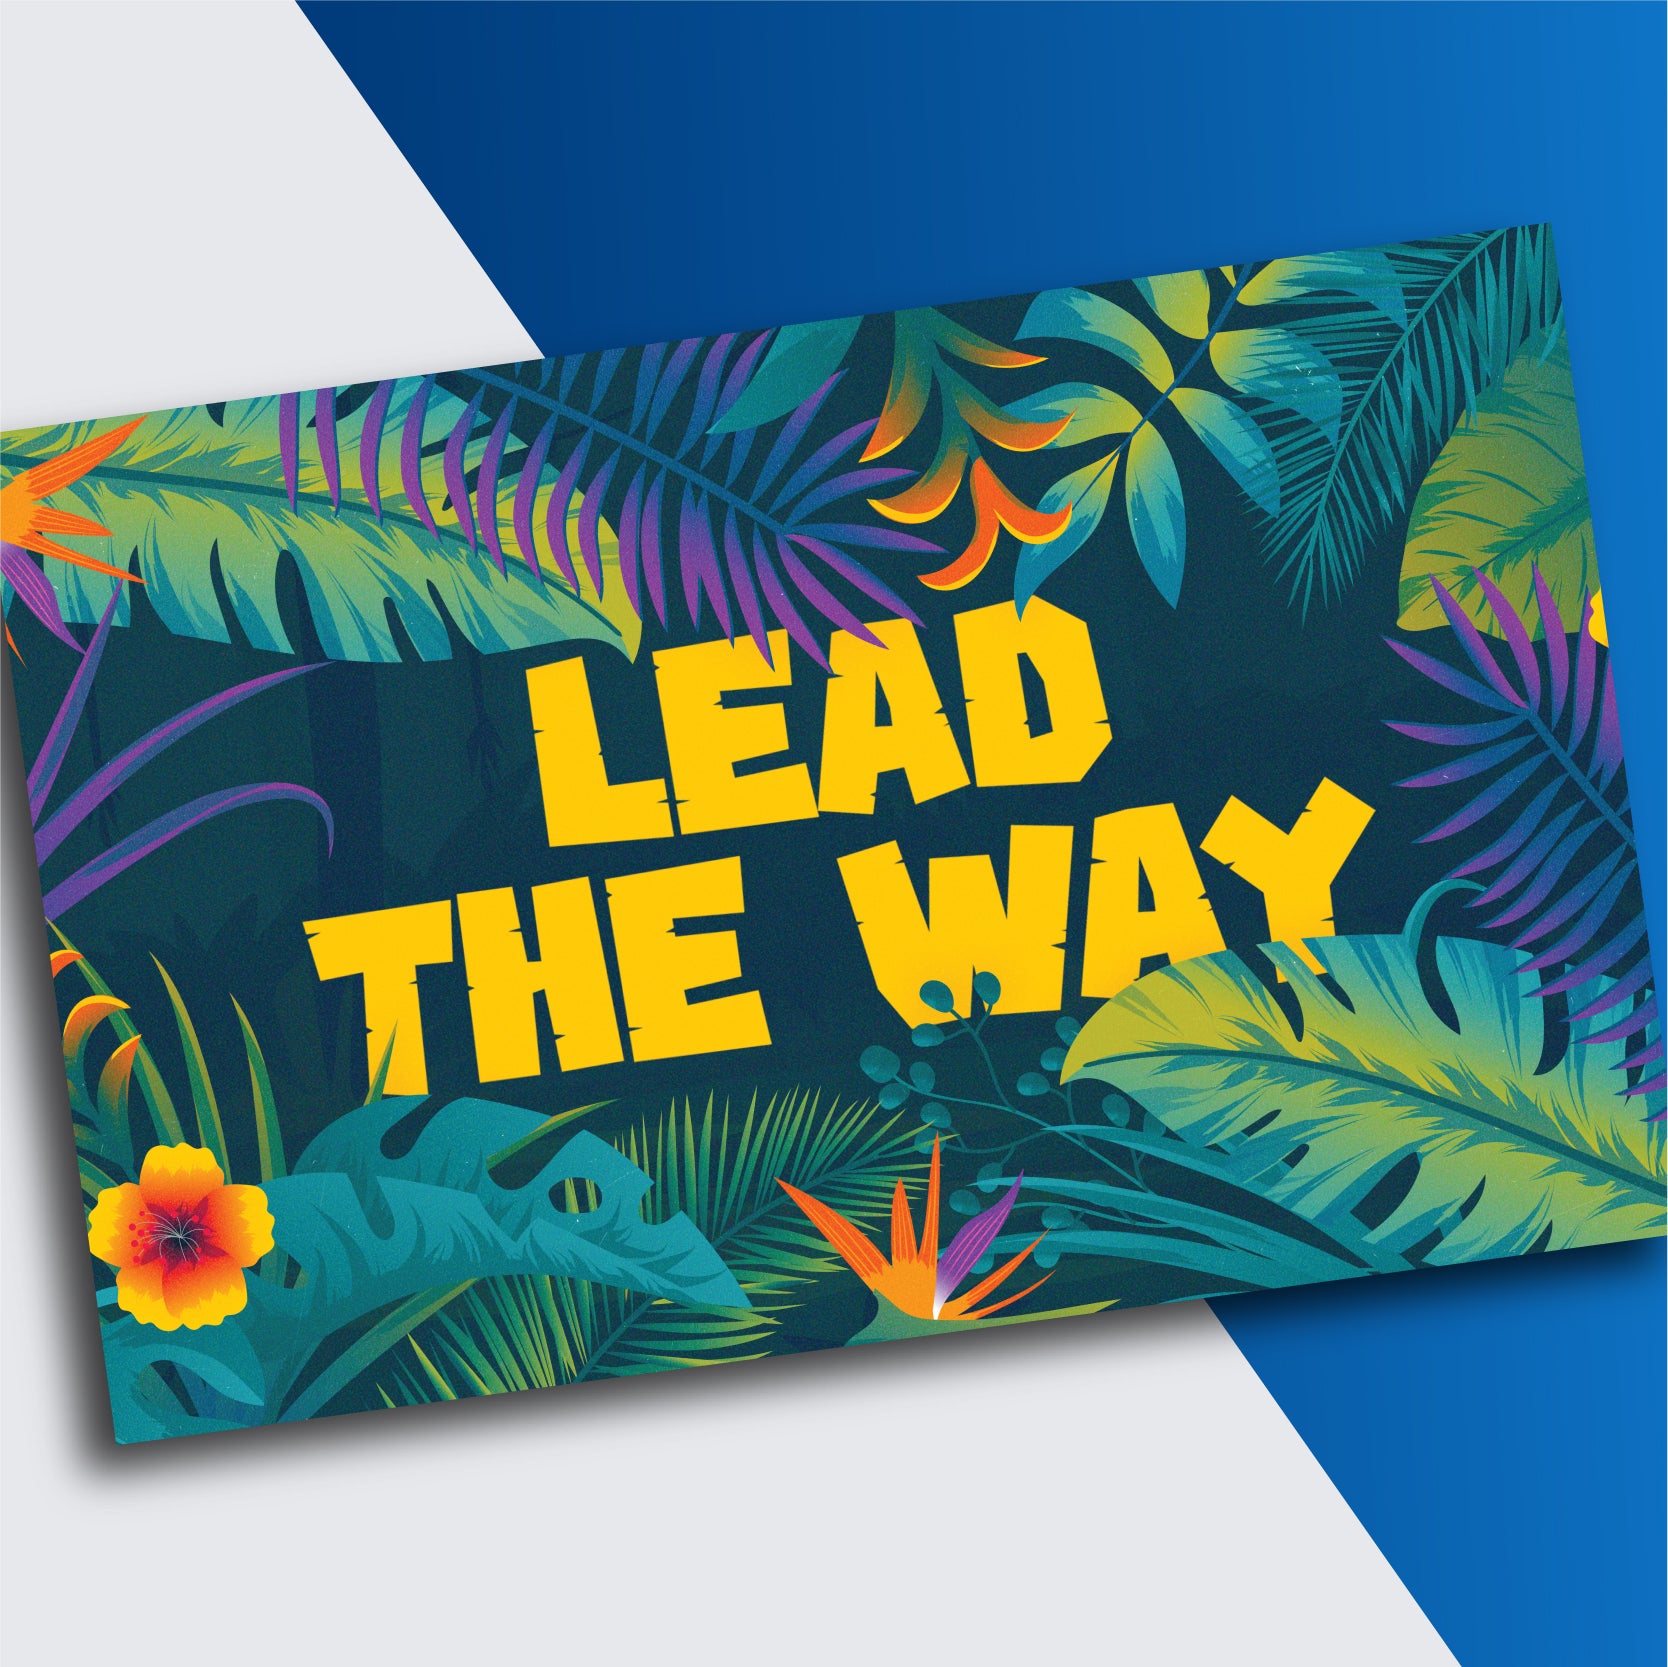 Lead The Way Posters